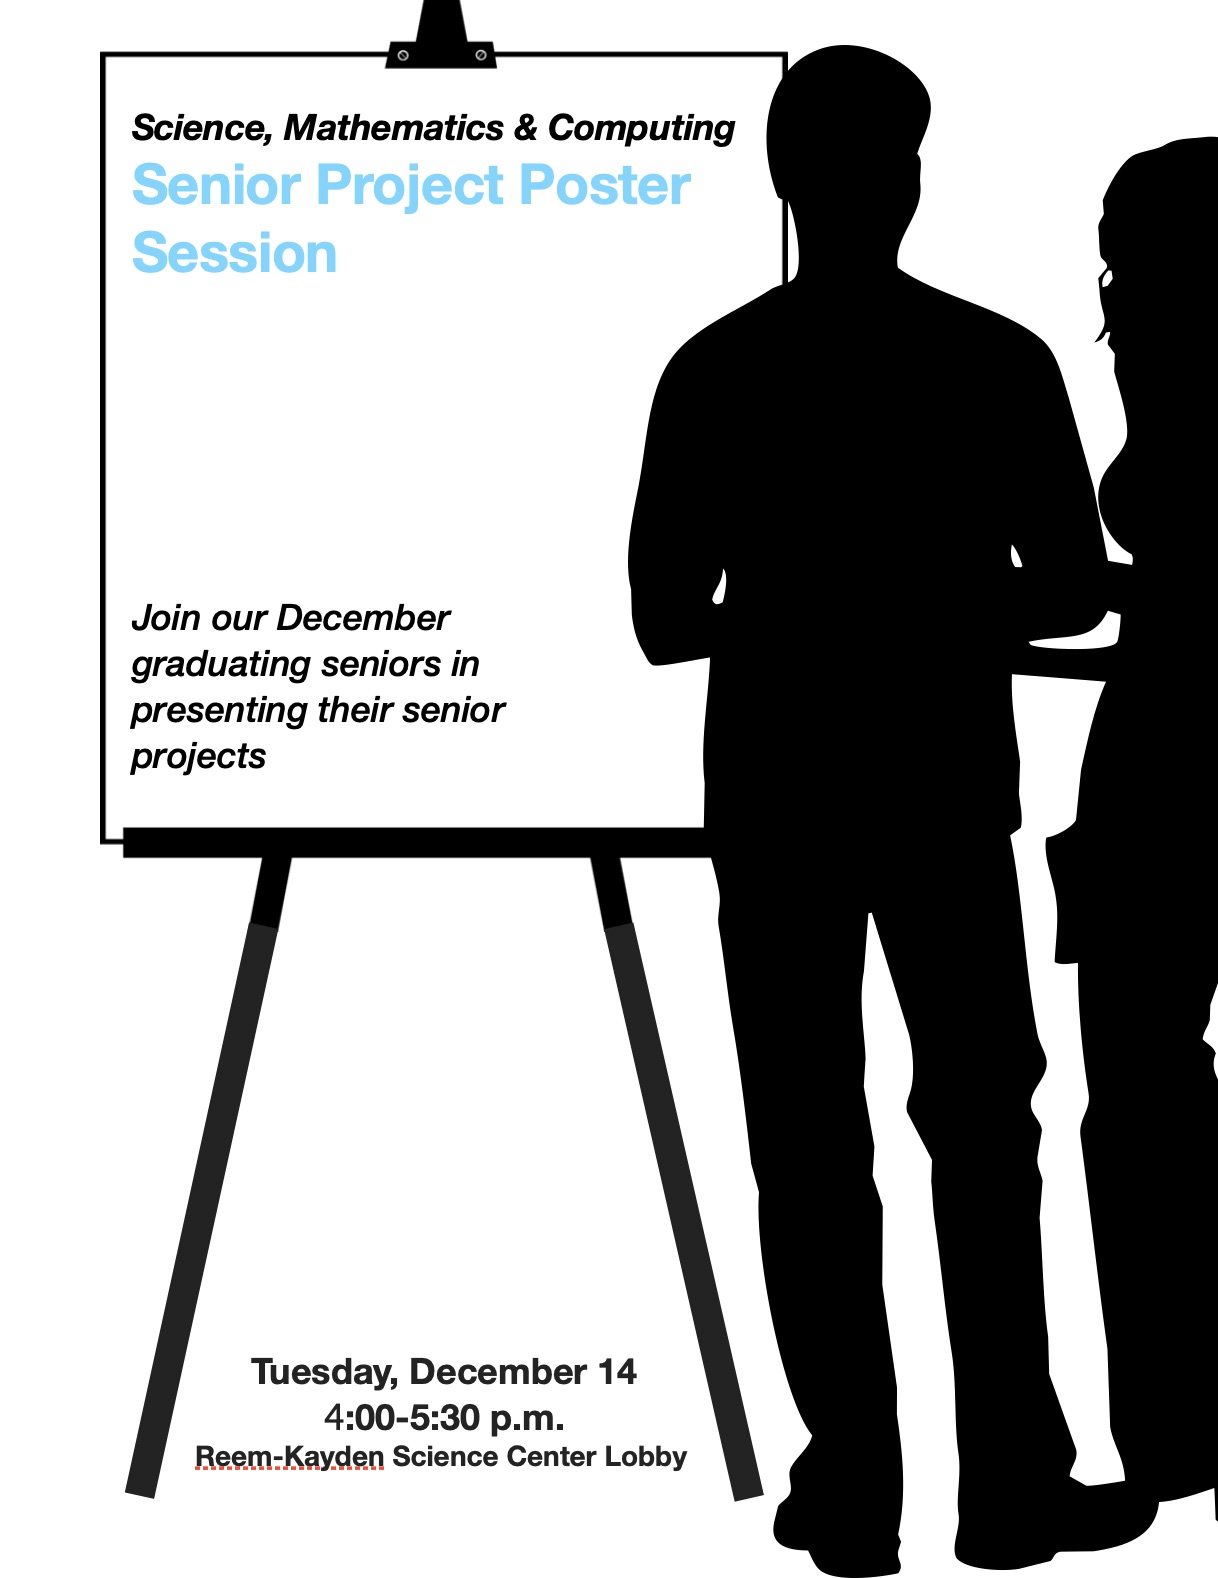 Senior Project Poster Session